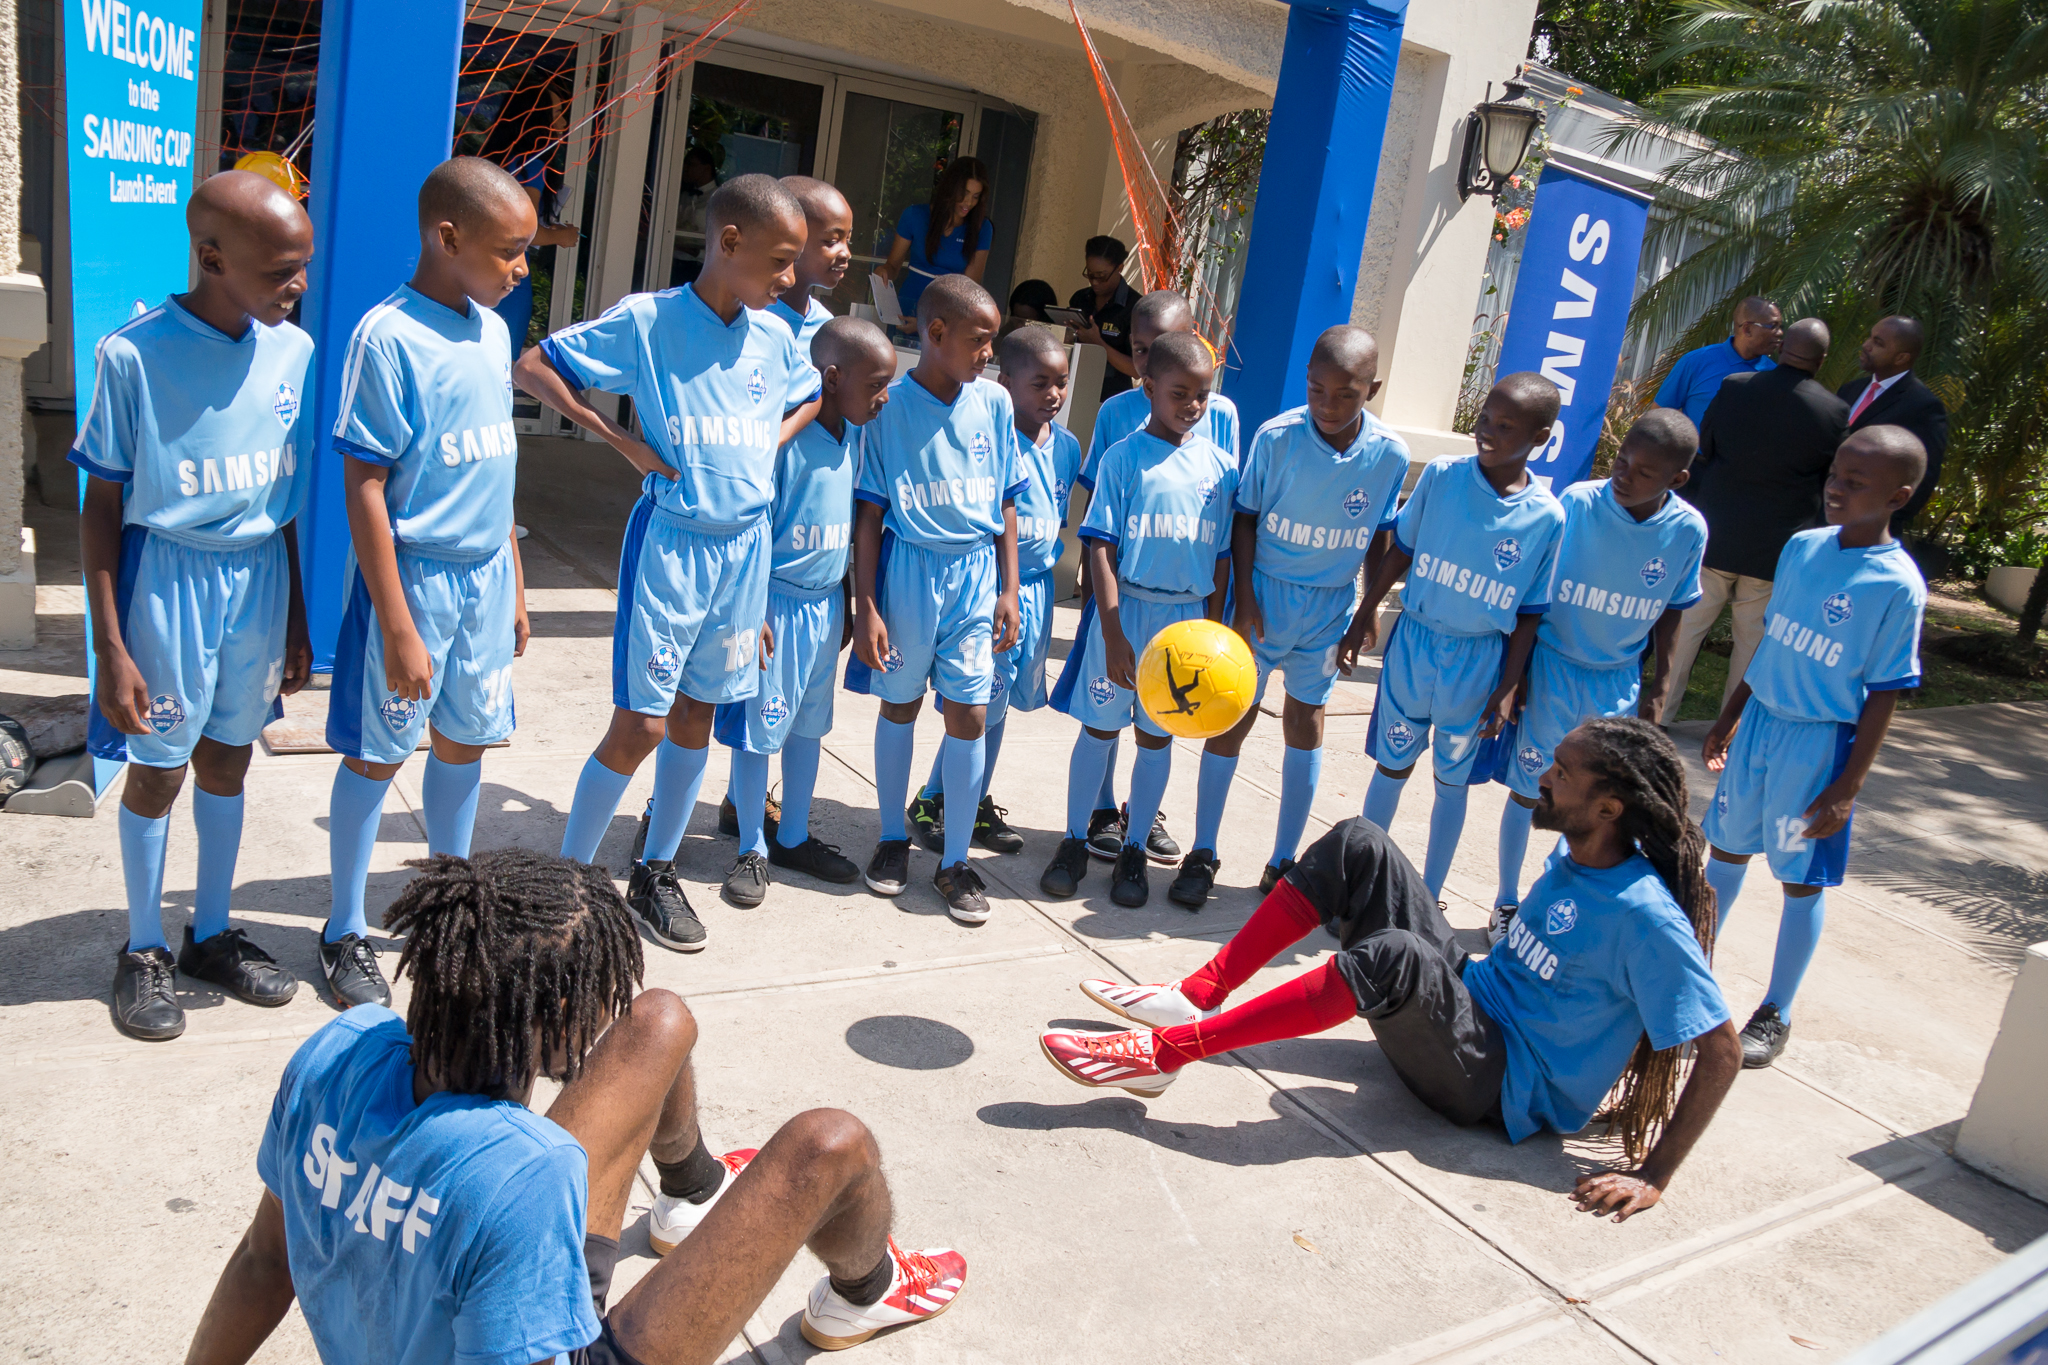 The Usain Bolt Foundation supports the 2nd Samsung Cup